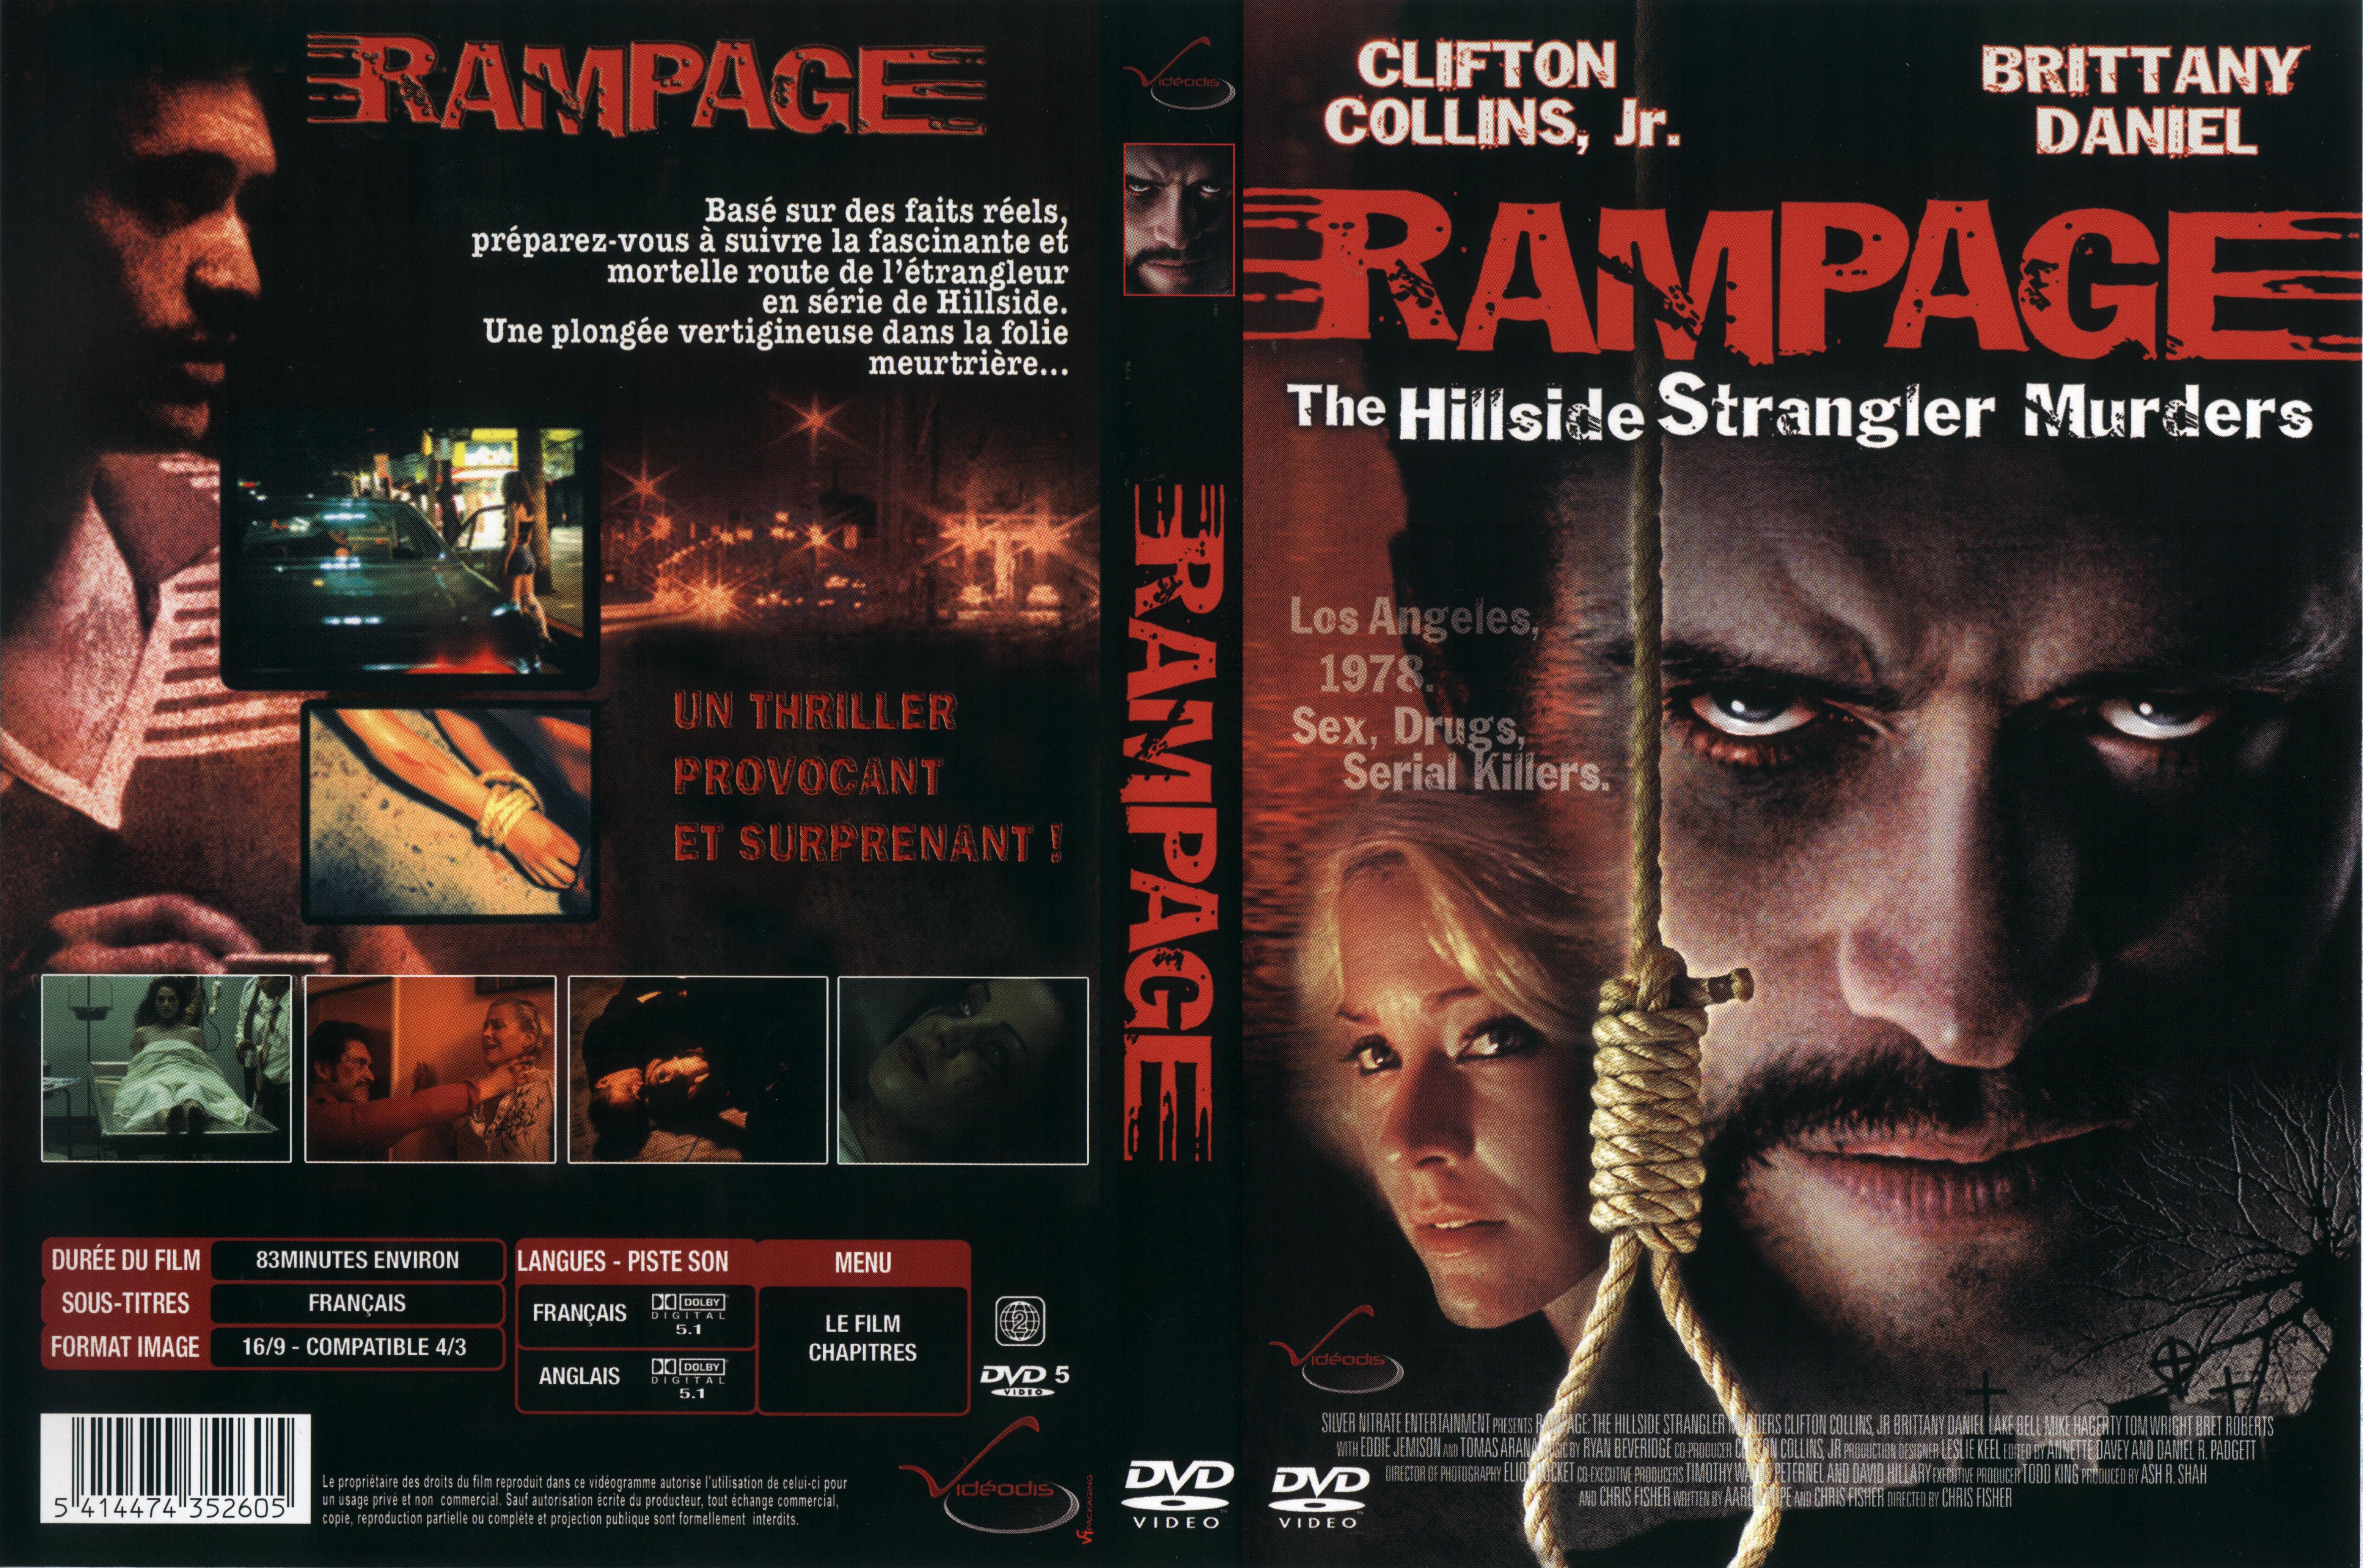 Jaquette DVD Rampage